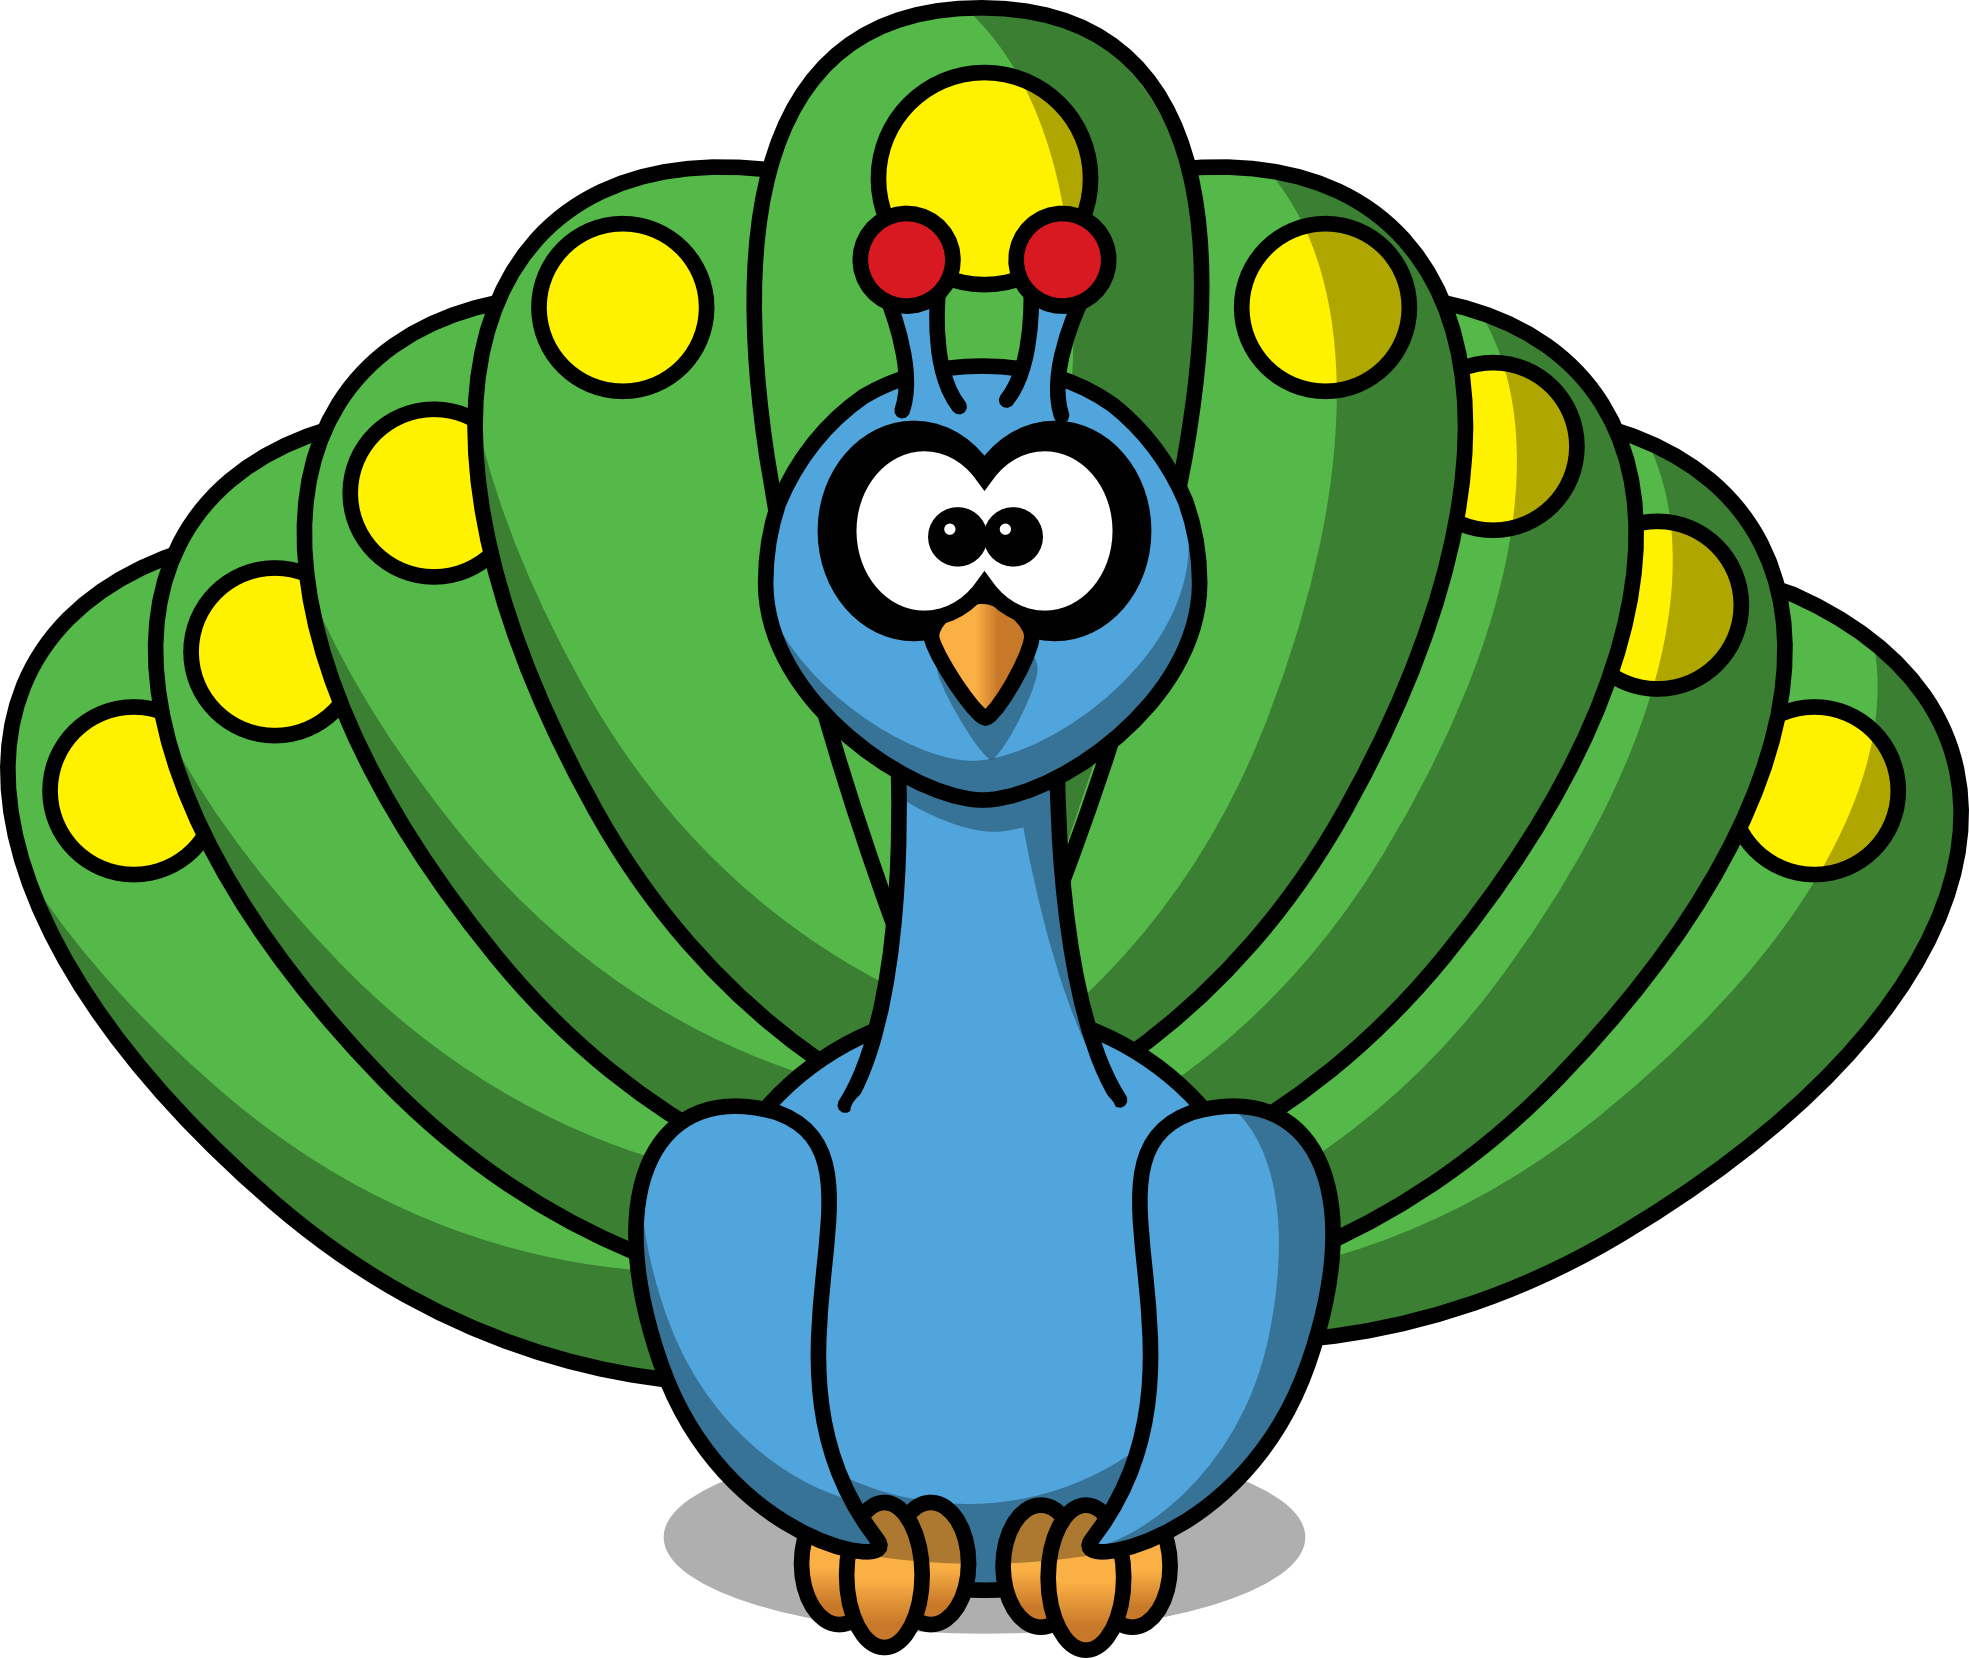 Peacock clipart #10, Download drawings